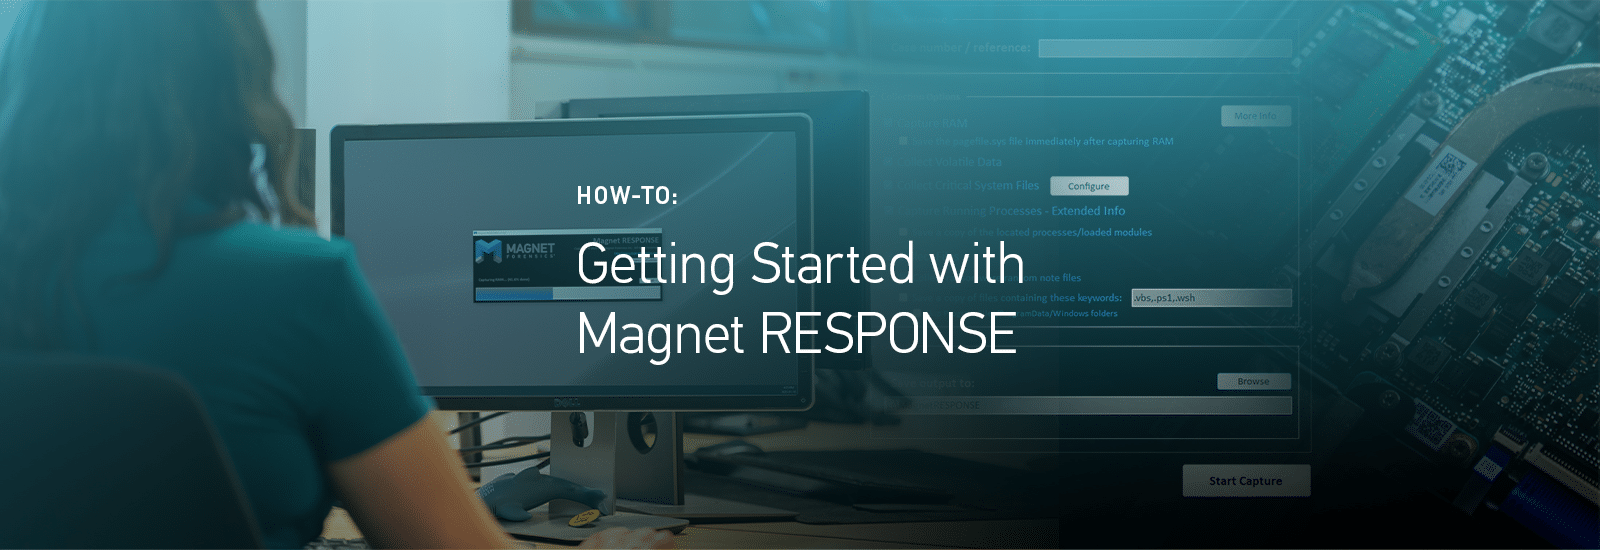 Getting Started With Magnet RESPONSE